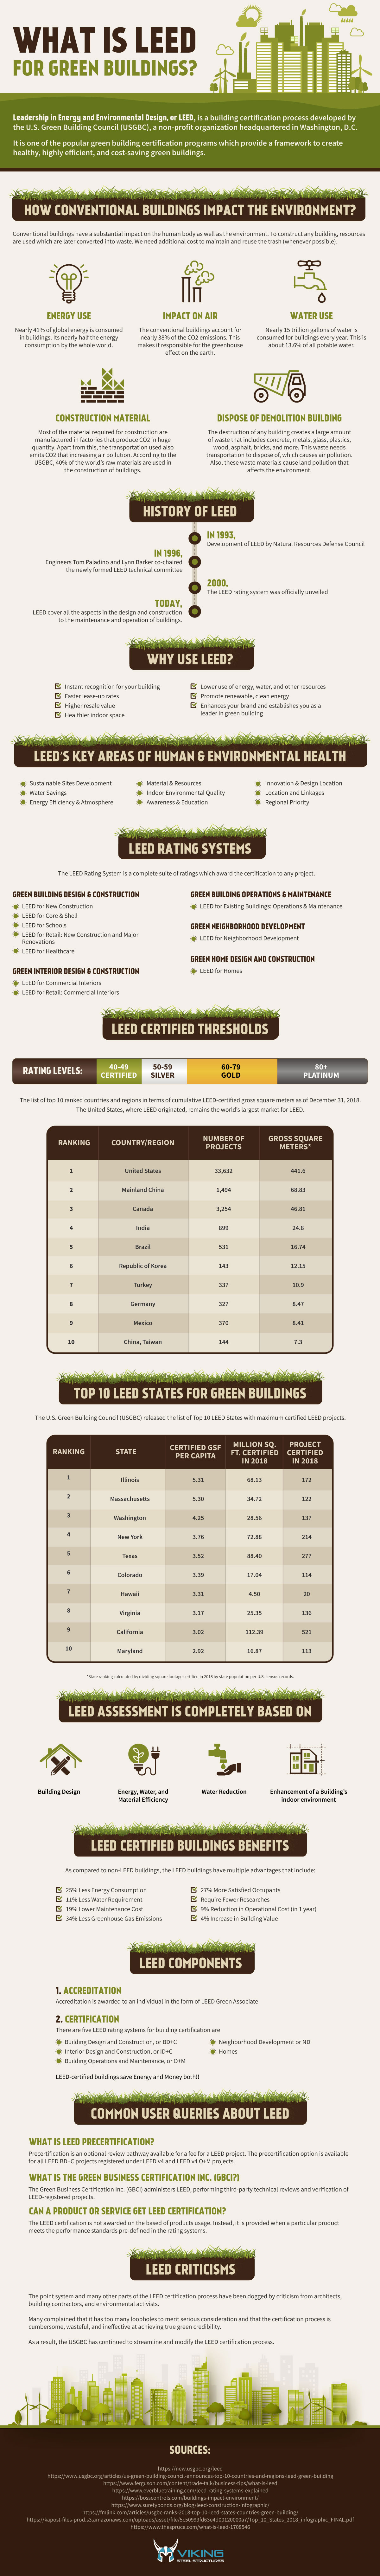 What is LEED for Green Buildings?